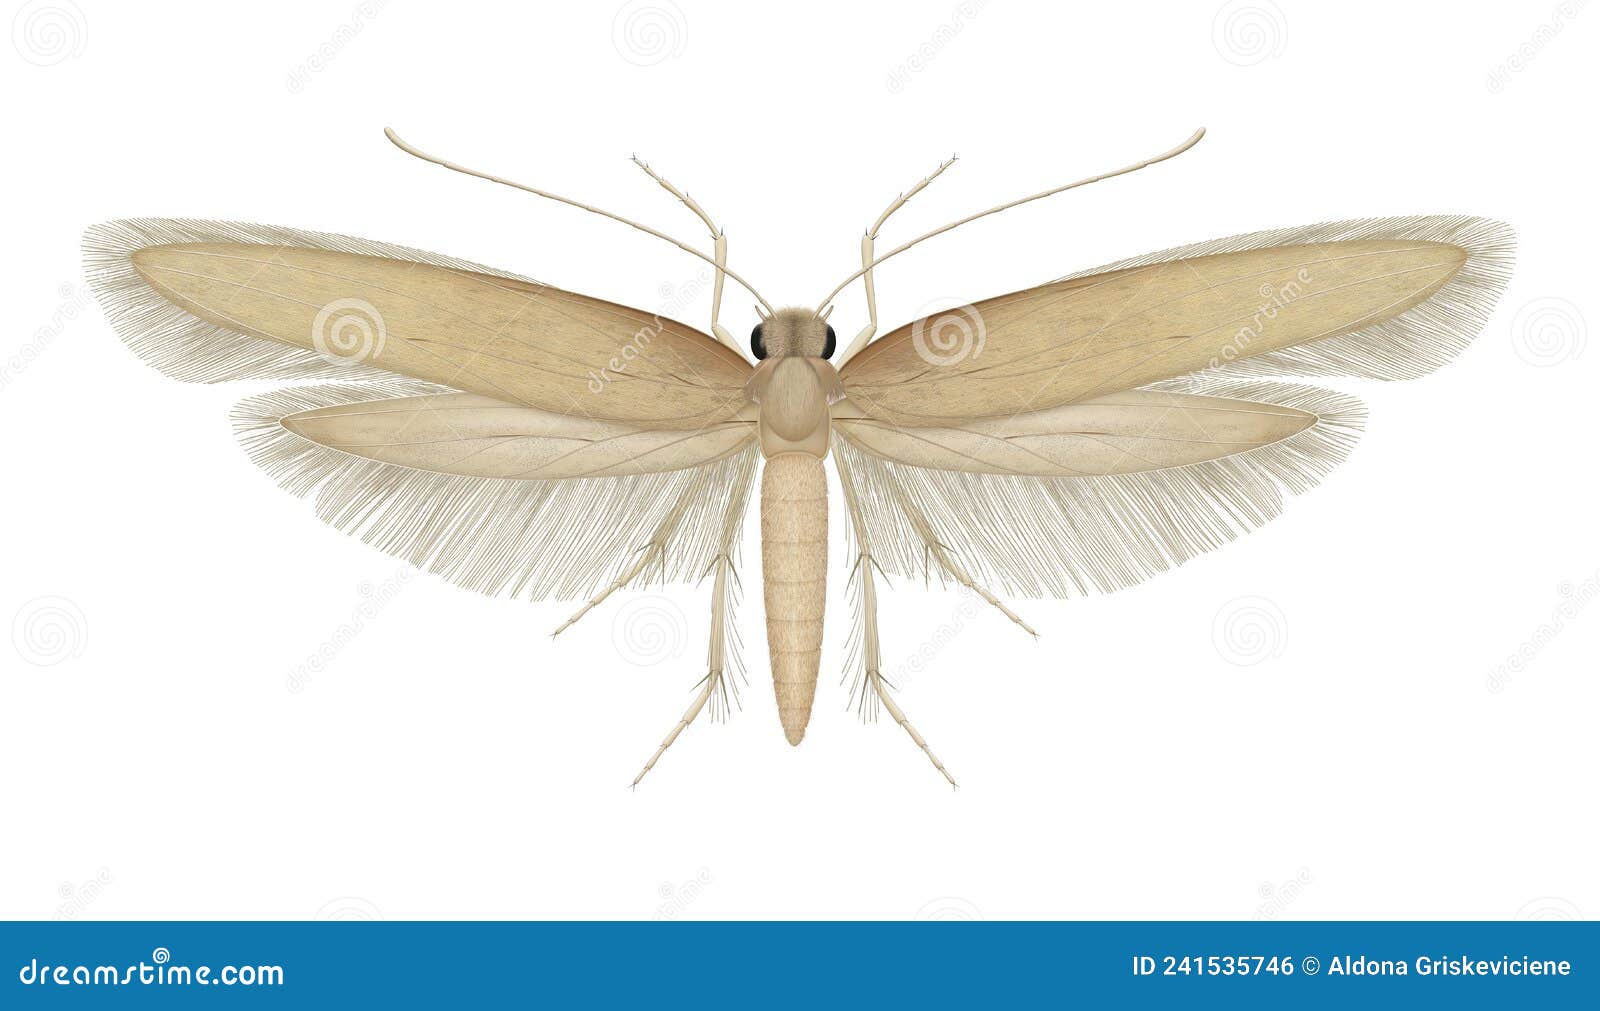 Tineola Bisselliella. Common Clothes Moth Royalty-Free Stock Image ...